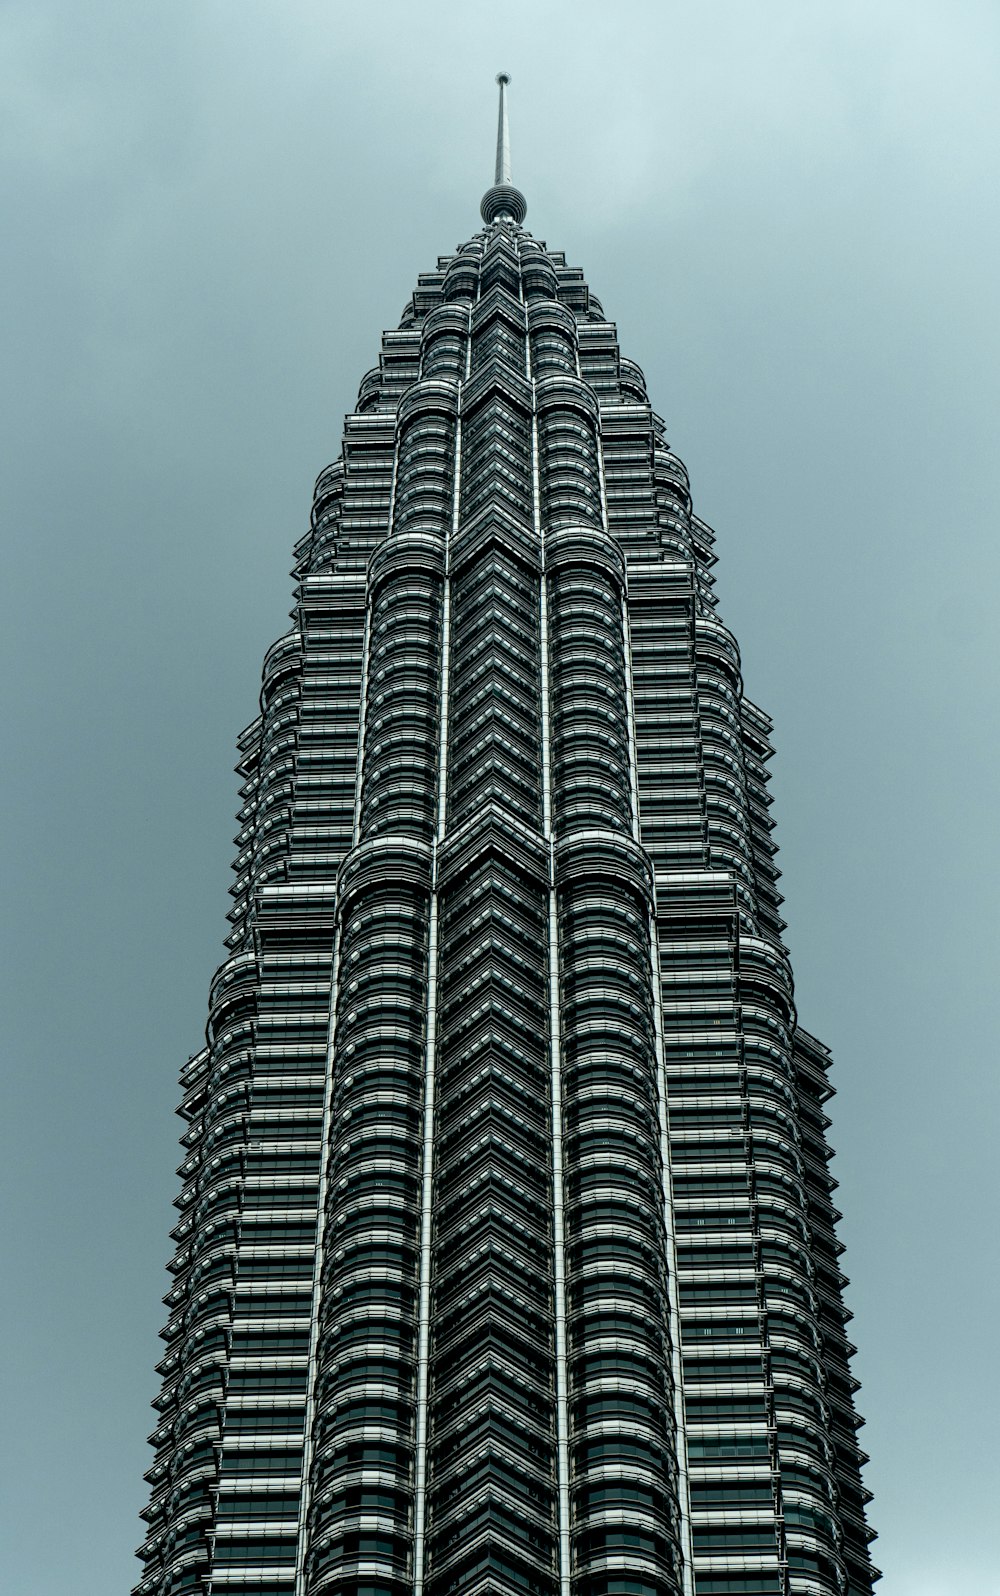 a tall building with a pointy top with Petronas Towers in the background